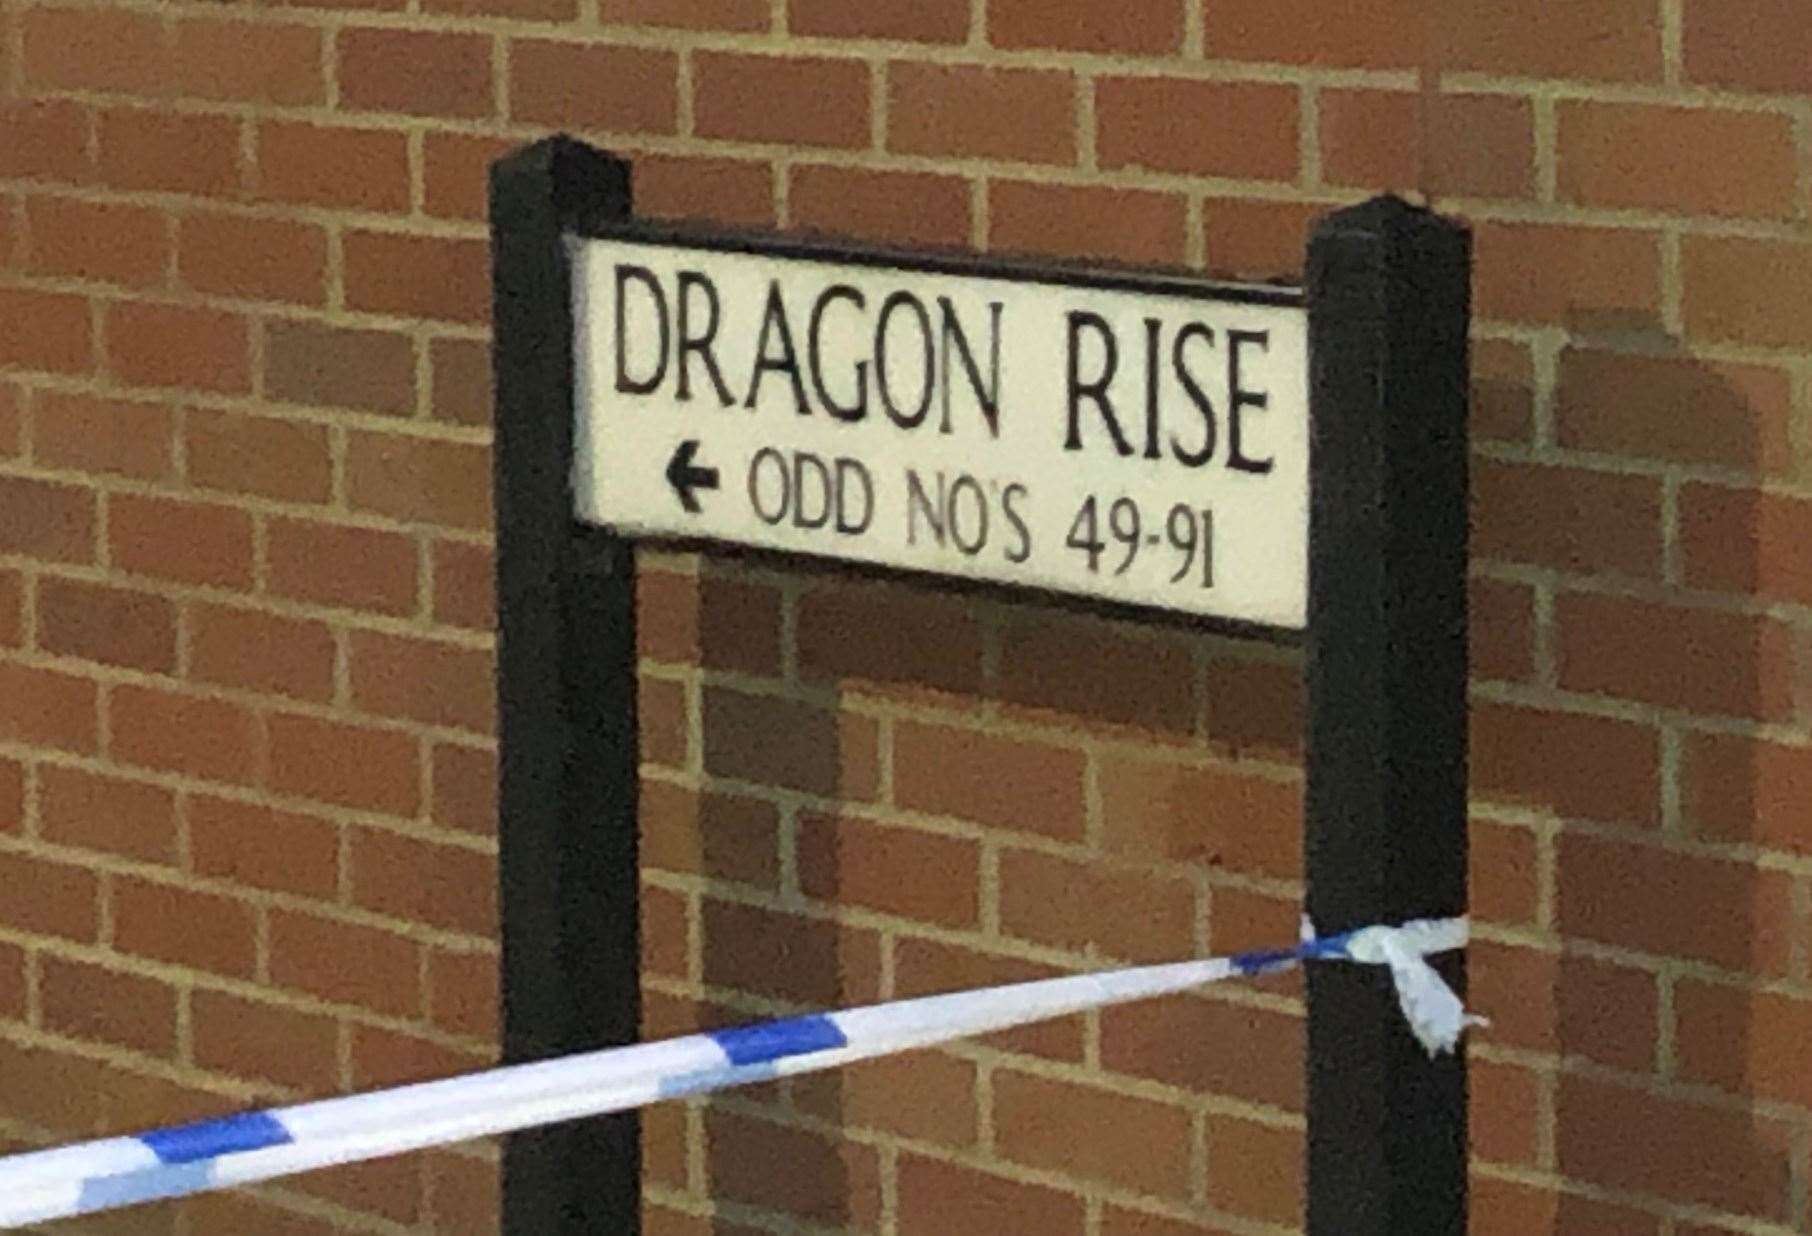 The Reeves and the Chapples were neighbours on Dragon Rise in Norton Fitzwarren near Taunton (PA)